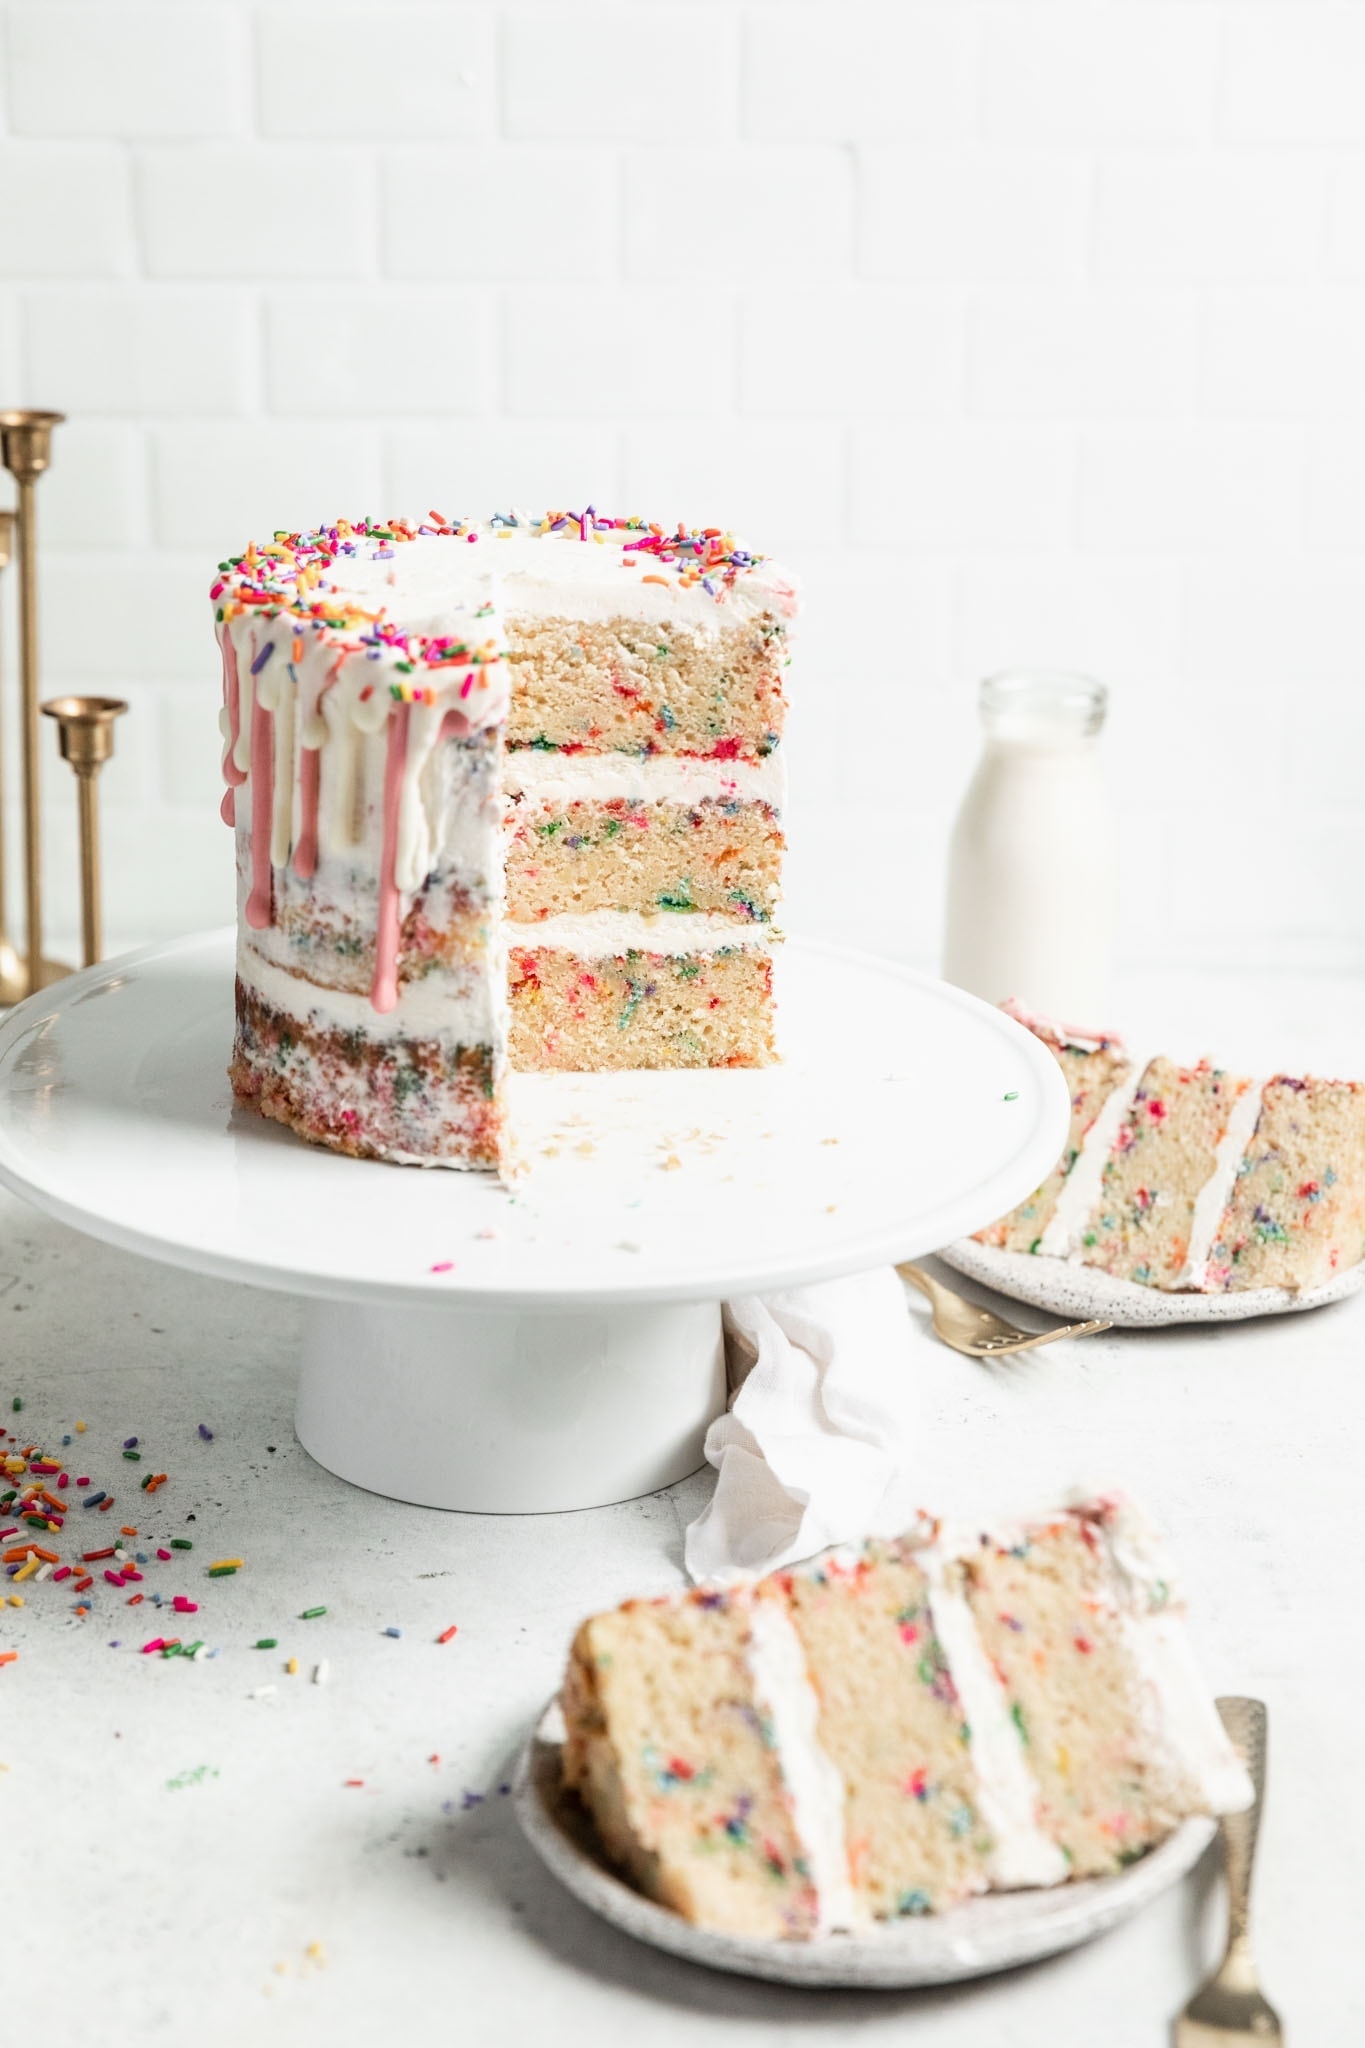 The best funfetti cake recipe! Tastes even better than the pillsbury cake mix and makes the perfect birthday cake.